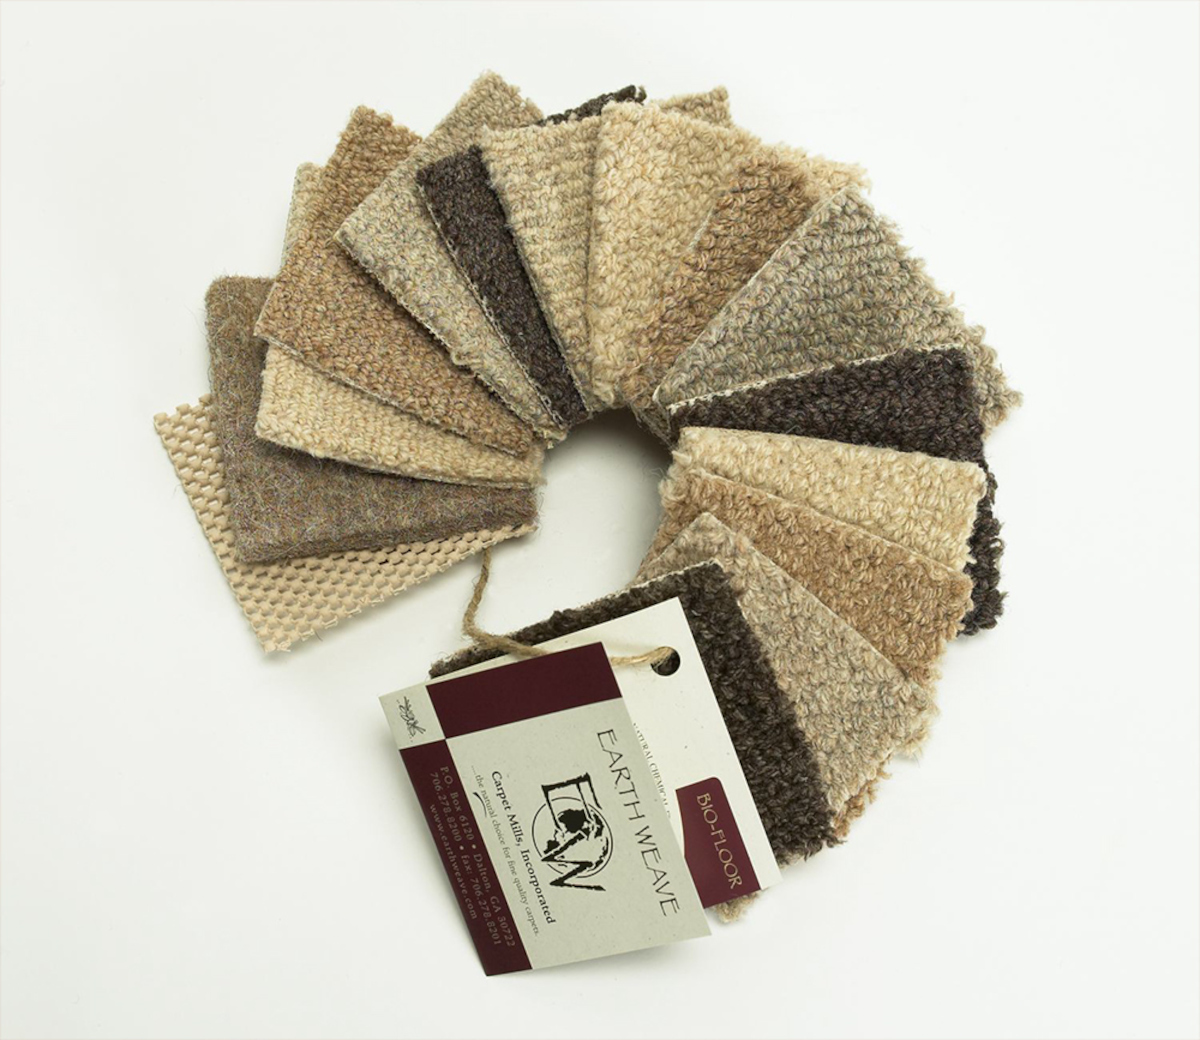 A fan of beige carpet sample with tag showing Earth Weave logo